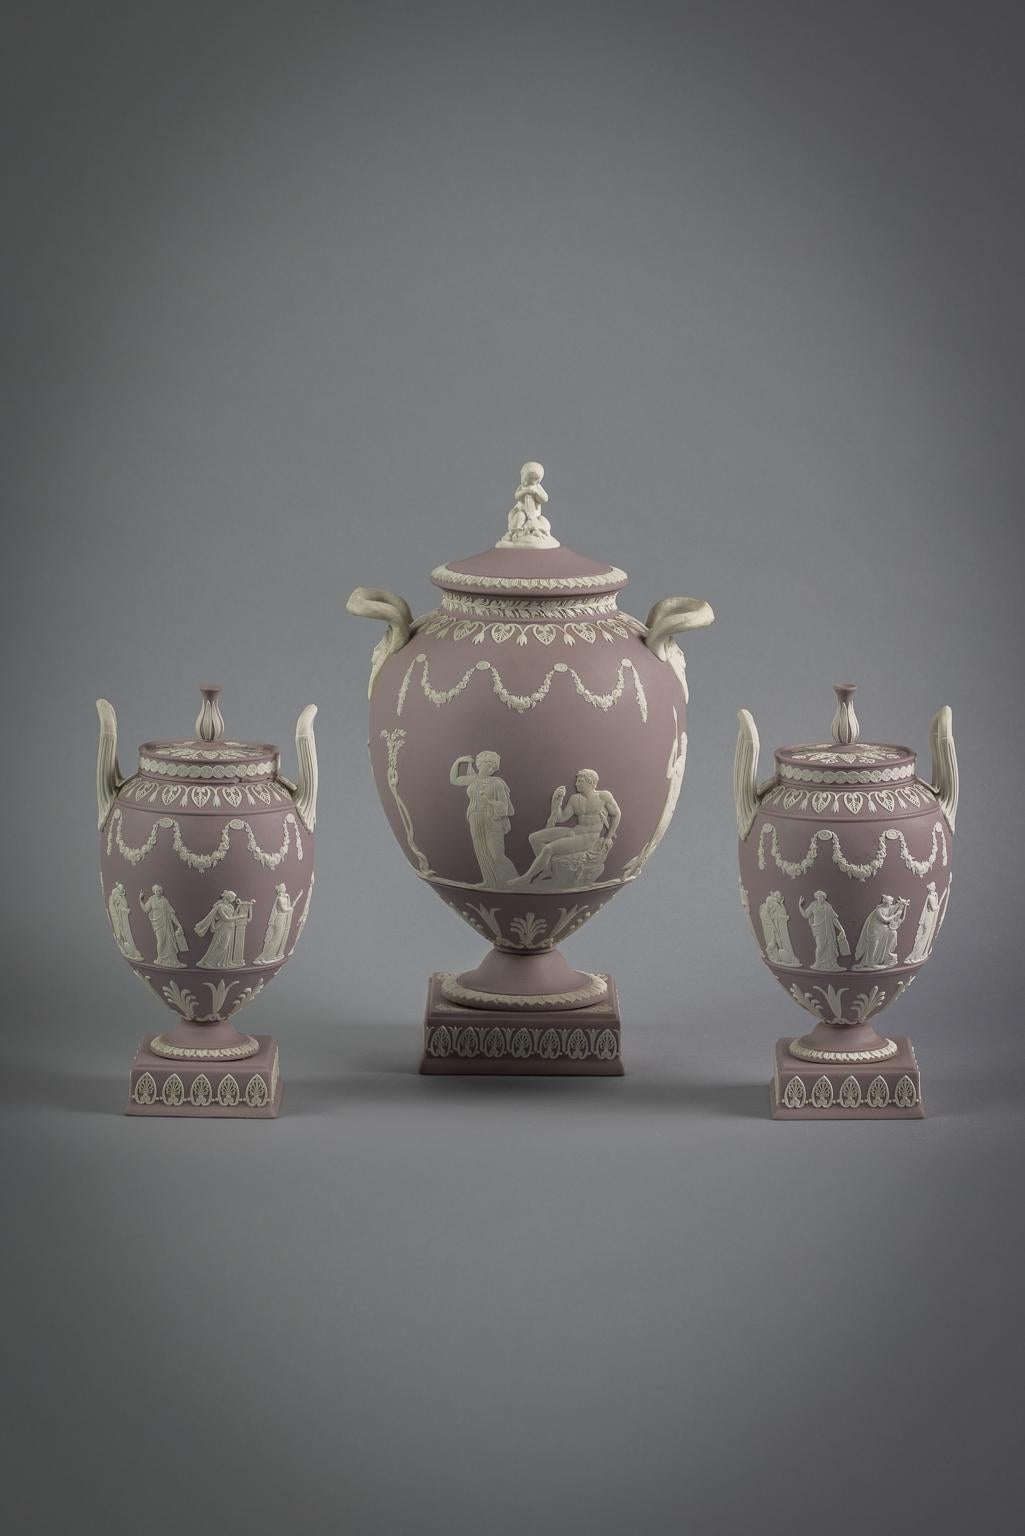 Lilac ground. Each encircled by frieze of classical figures beneath floral swags, the largest flanked by serpent handles with mask terminal and Cupid finial, impressed WEDGWOOD, MADE IN ENGLAND, the smaller pair with upright reeded handles and bud